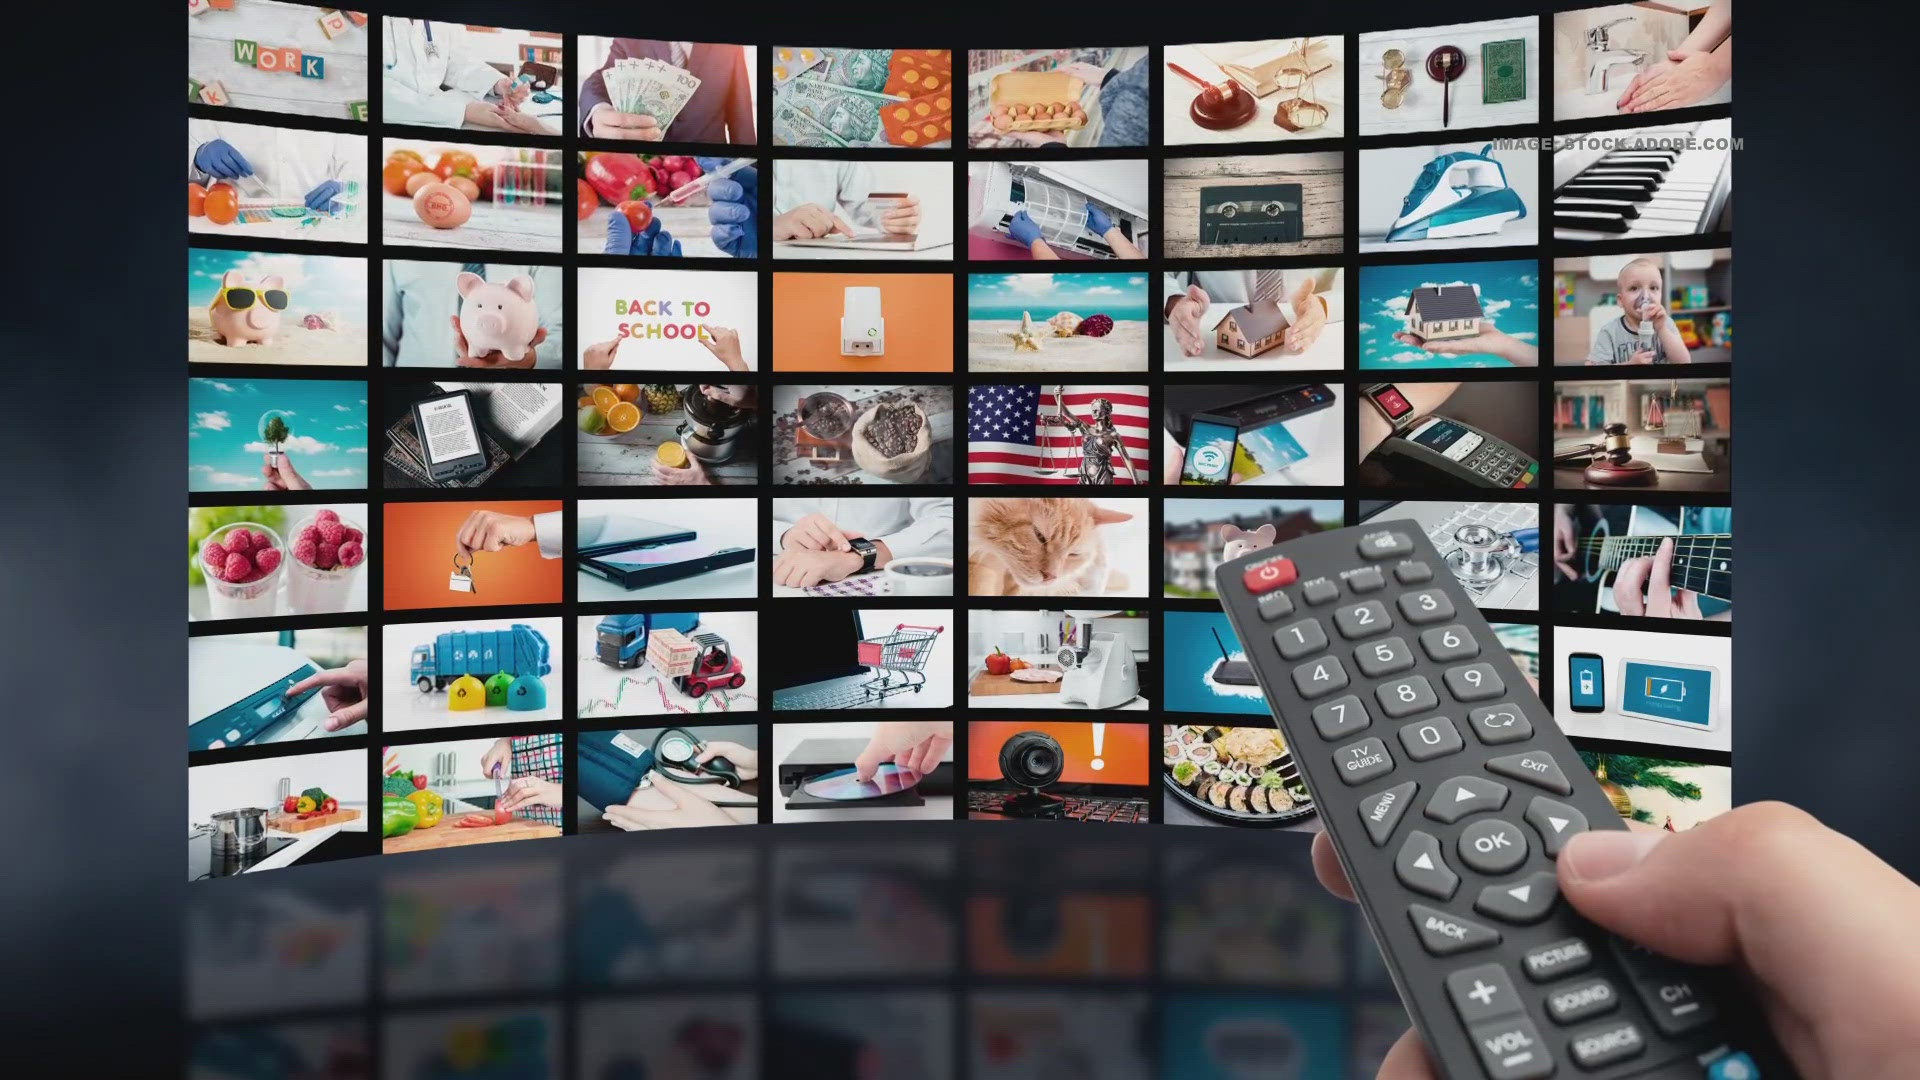 A CNET expert shares ways to cut costs and still see your favorite shows.